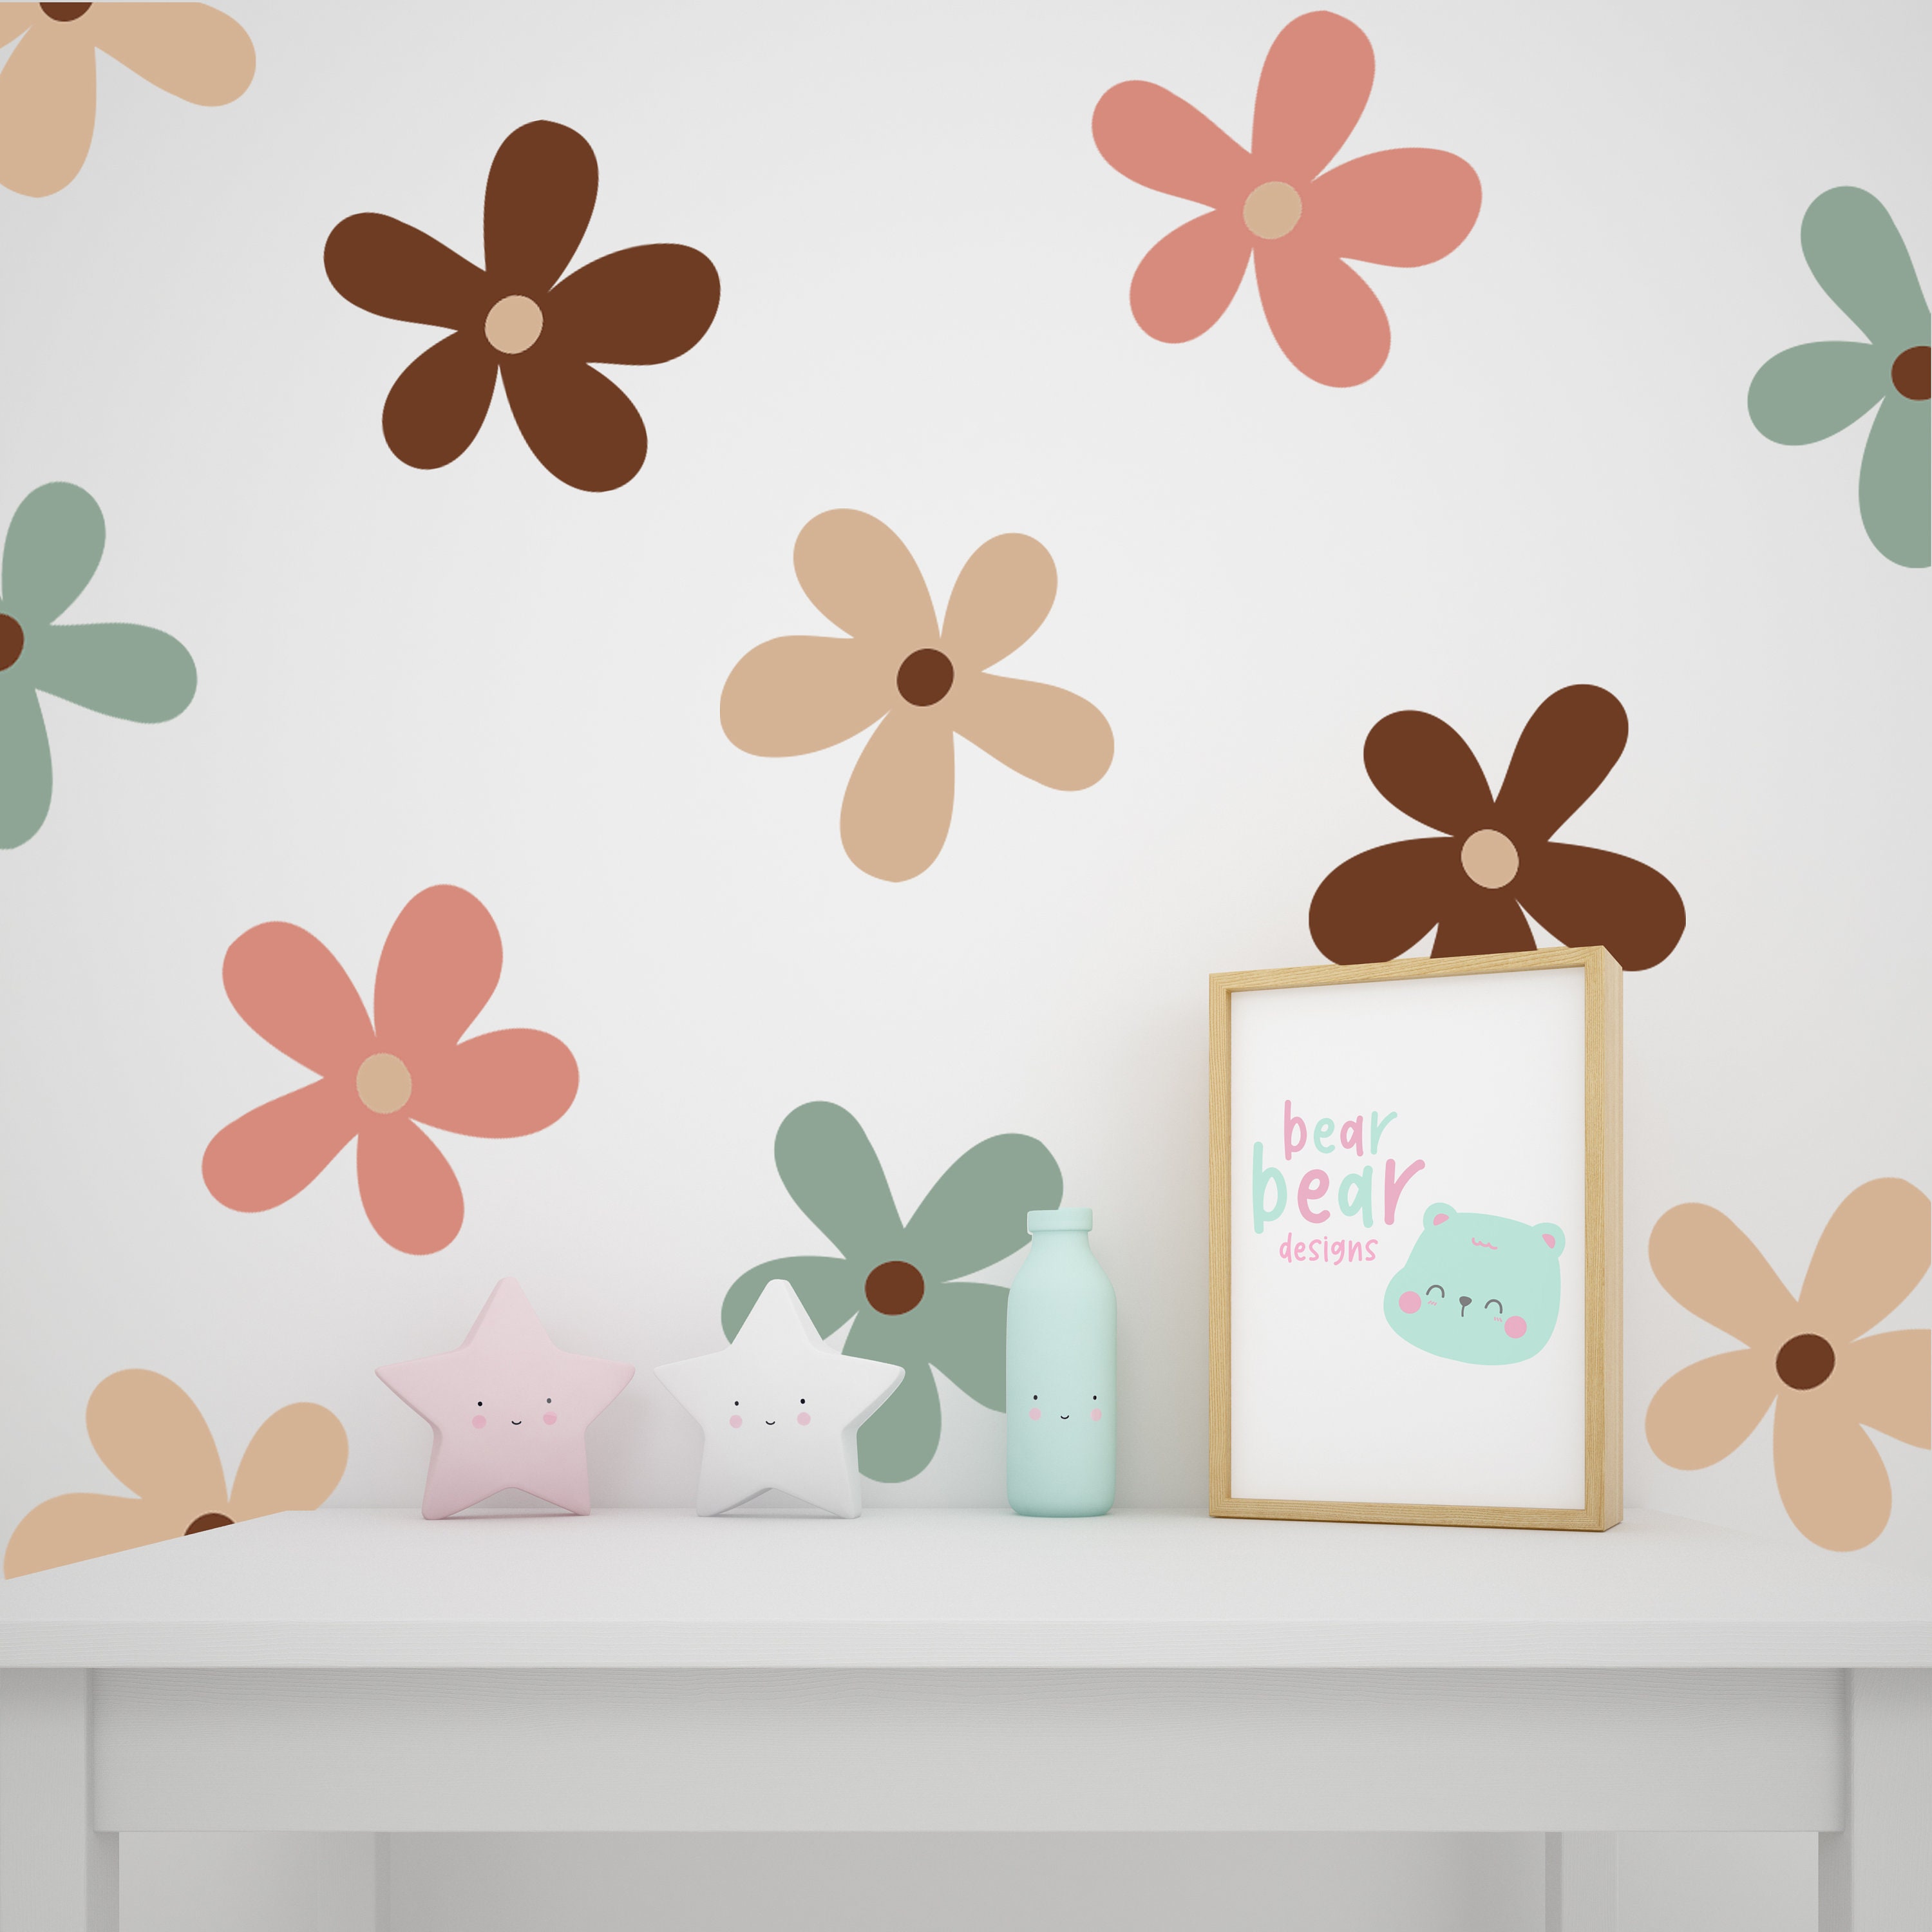 12 Sheets Daisy Stickers 133 Pieces Daisy Flower Decals Vinyl